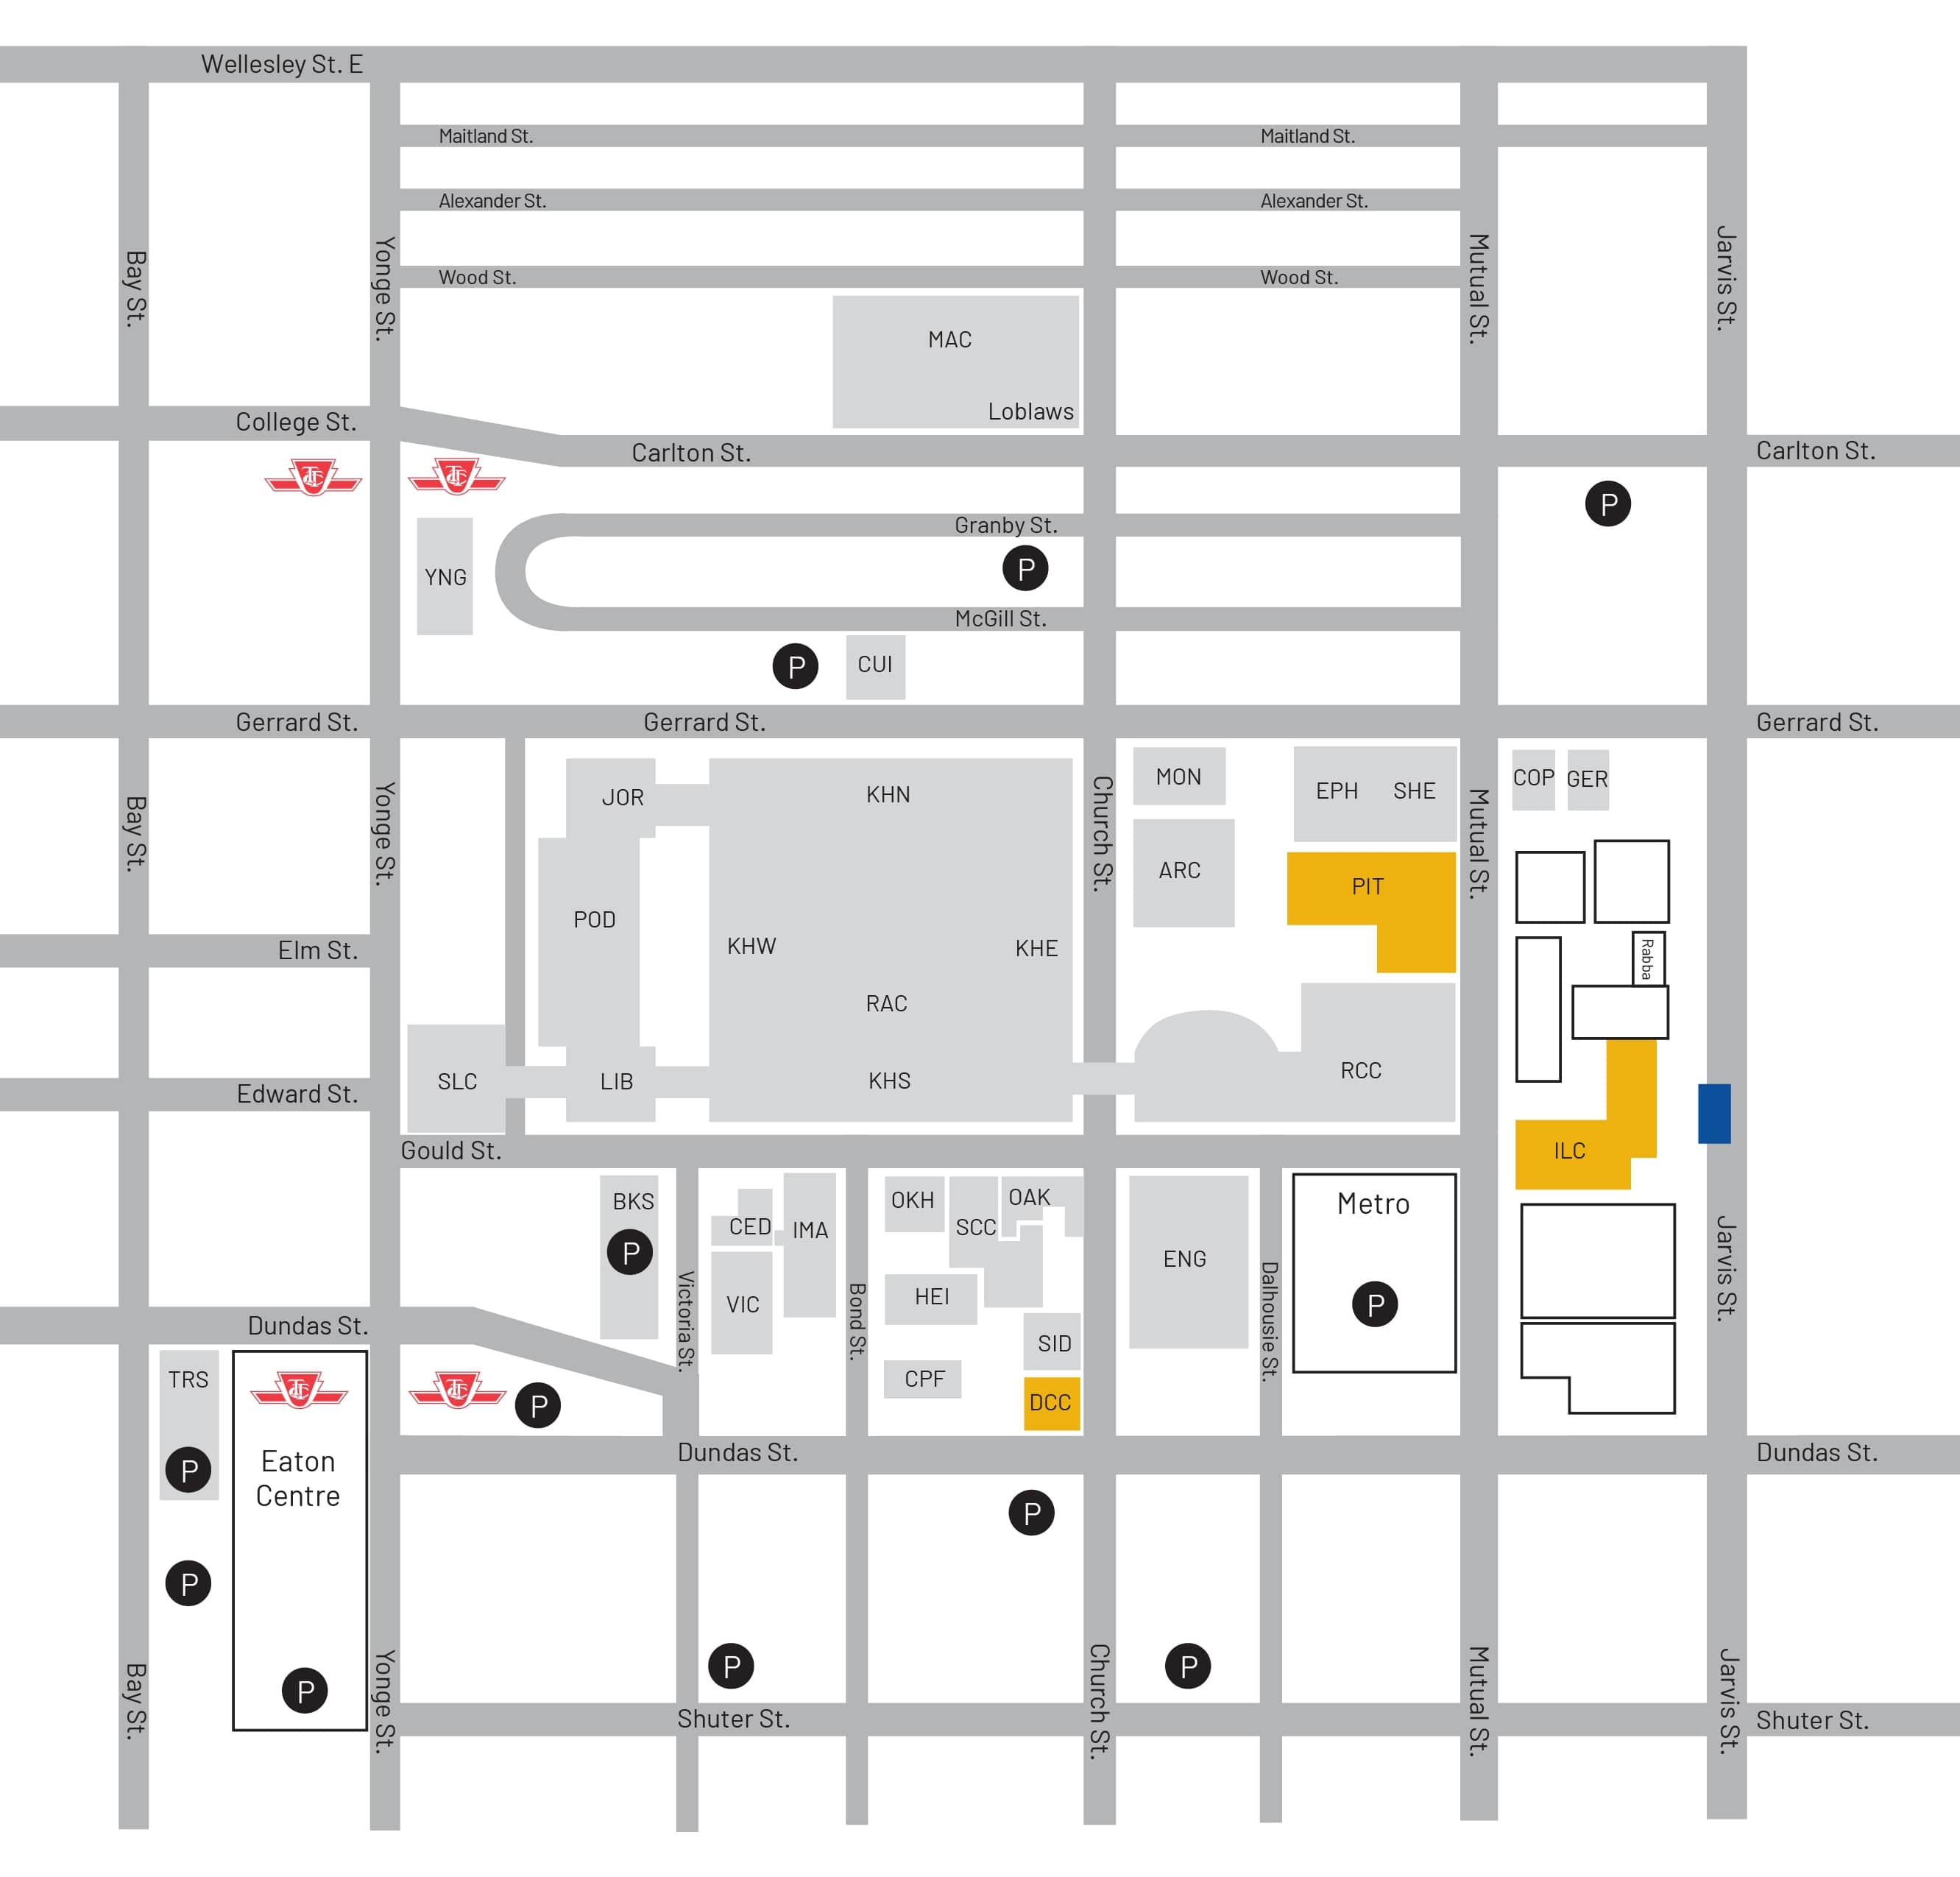 A variety of parking options are available in and around Toronto Met for you to park your car on Move-in Day. It is a good idea to bring cash, as some parking lots do not accept cards.